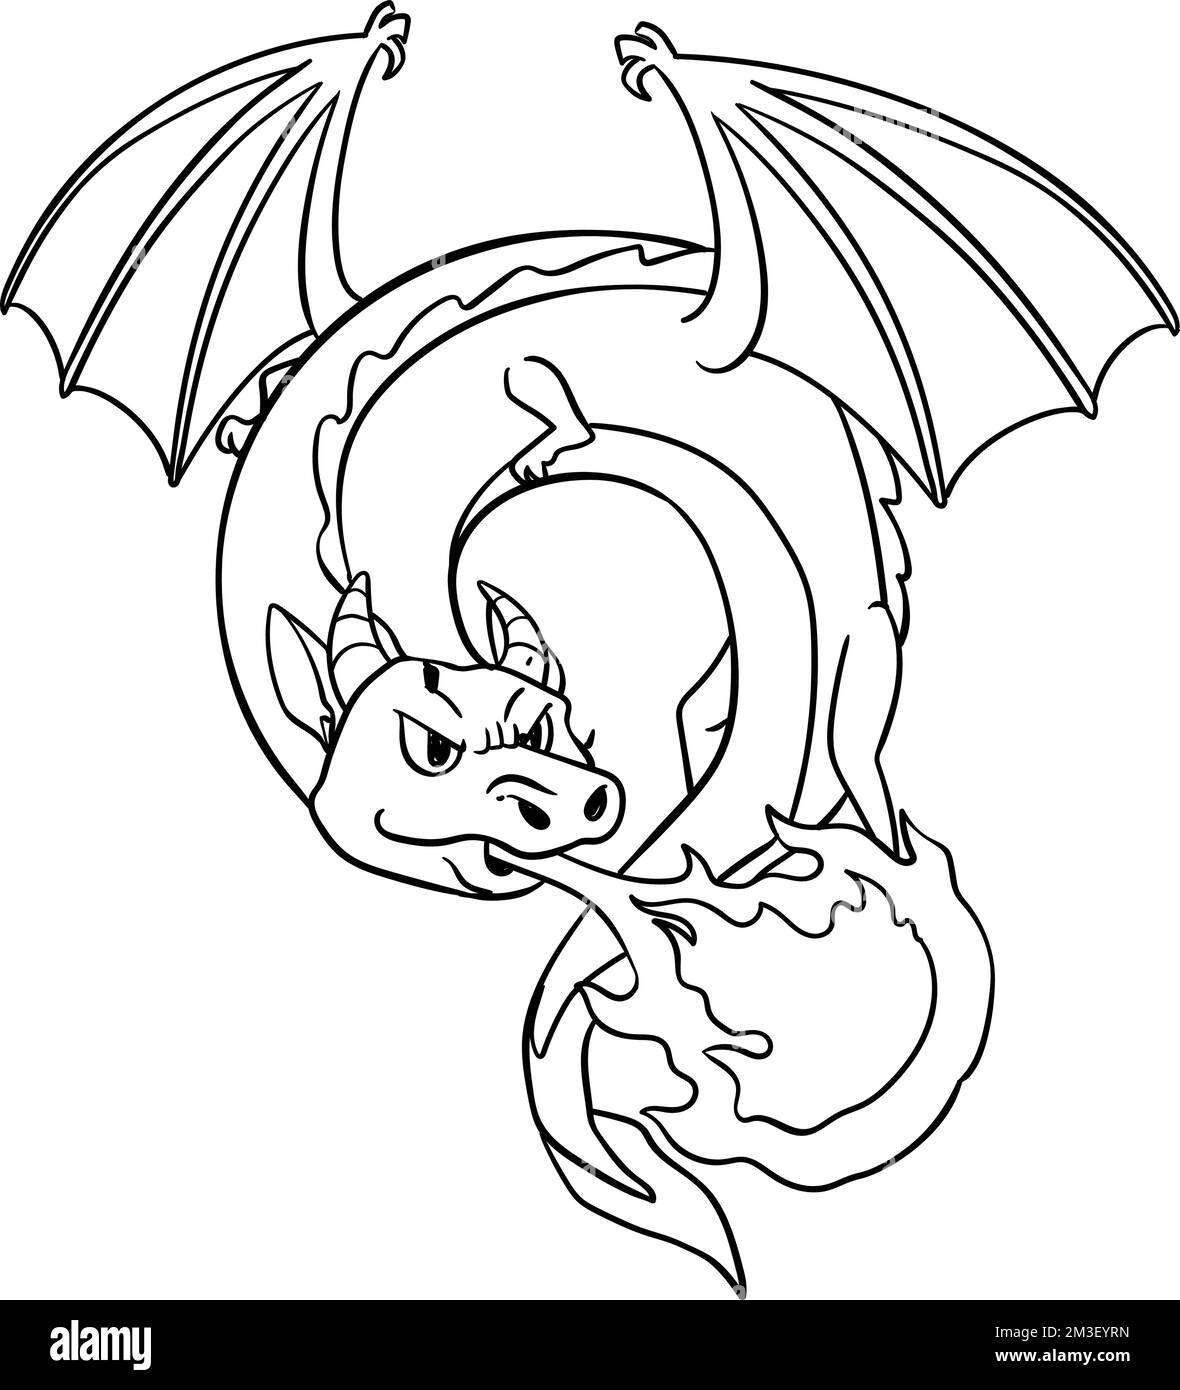 Knight Dragon Isolated Coloring Page for Kids Stock Vector